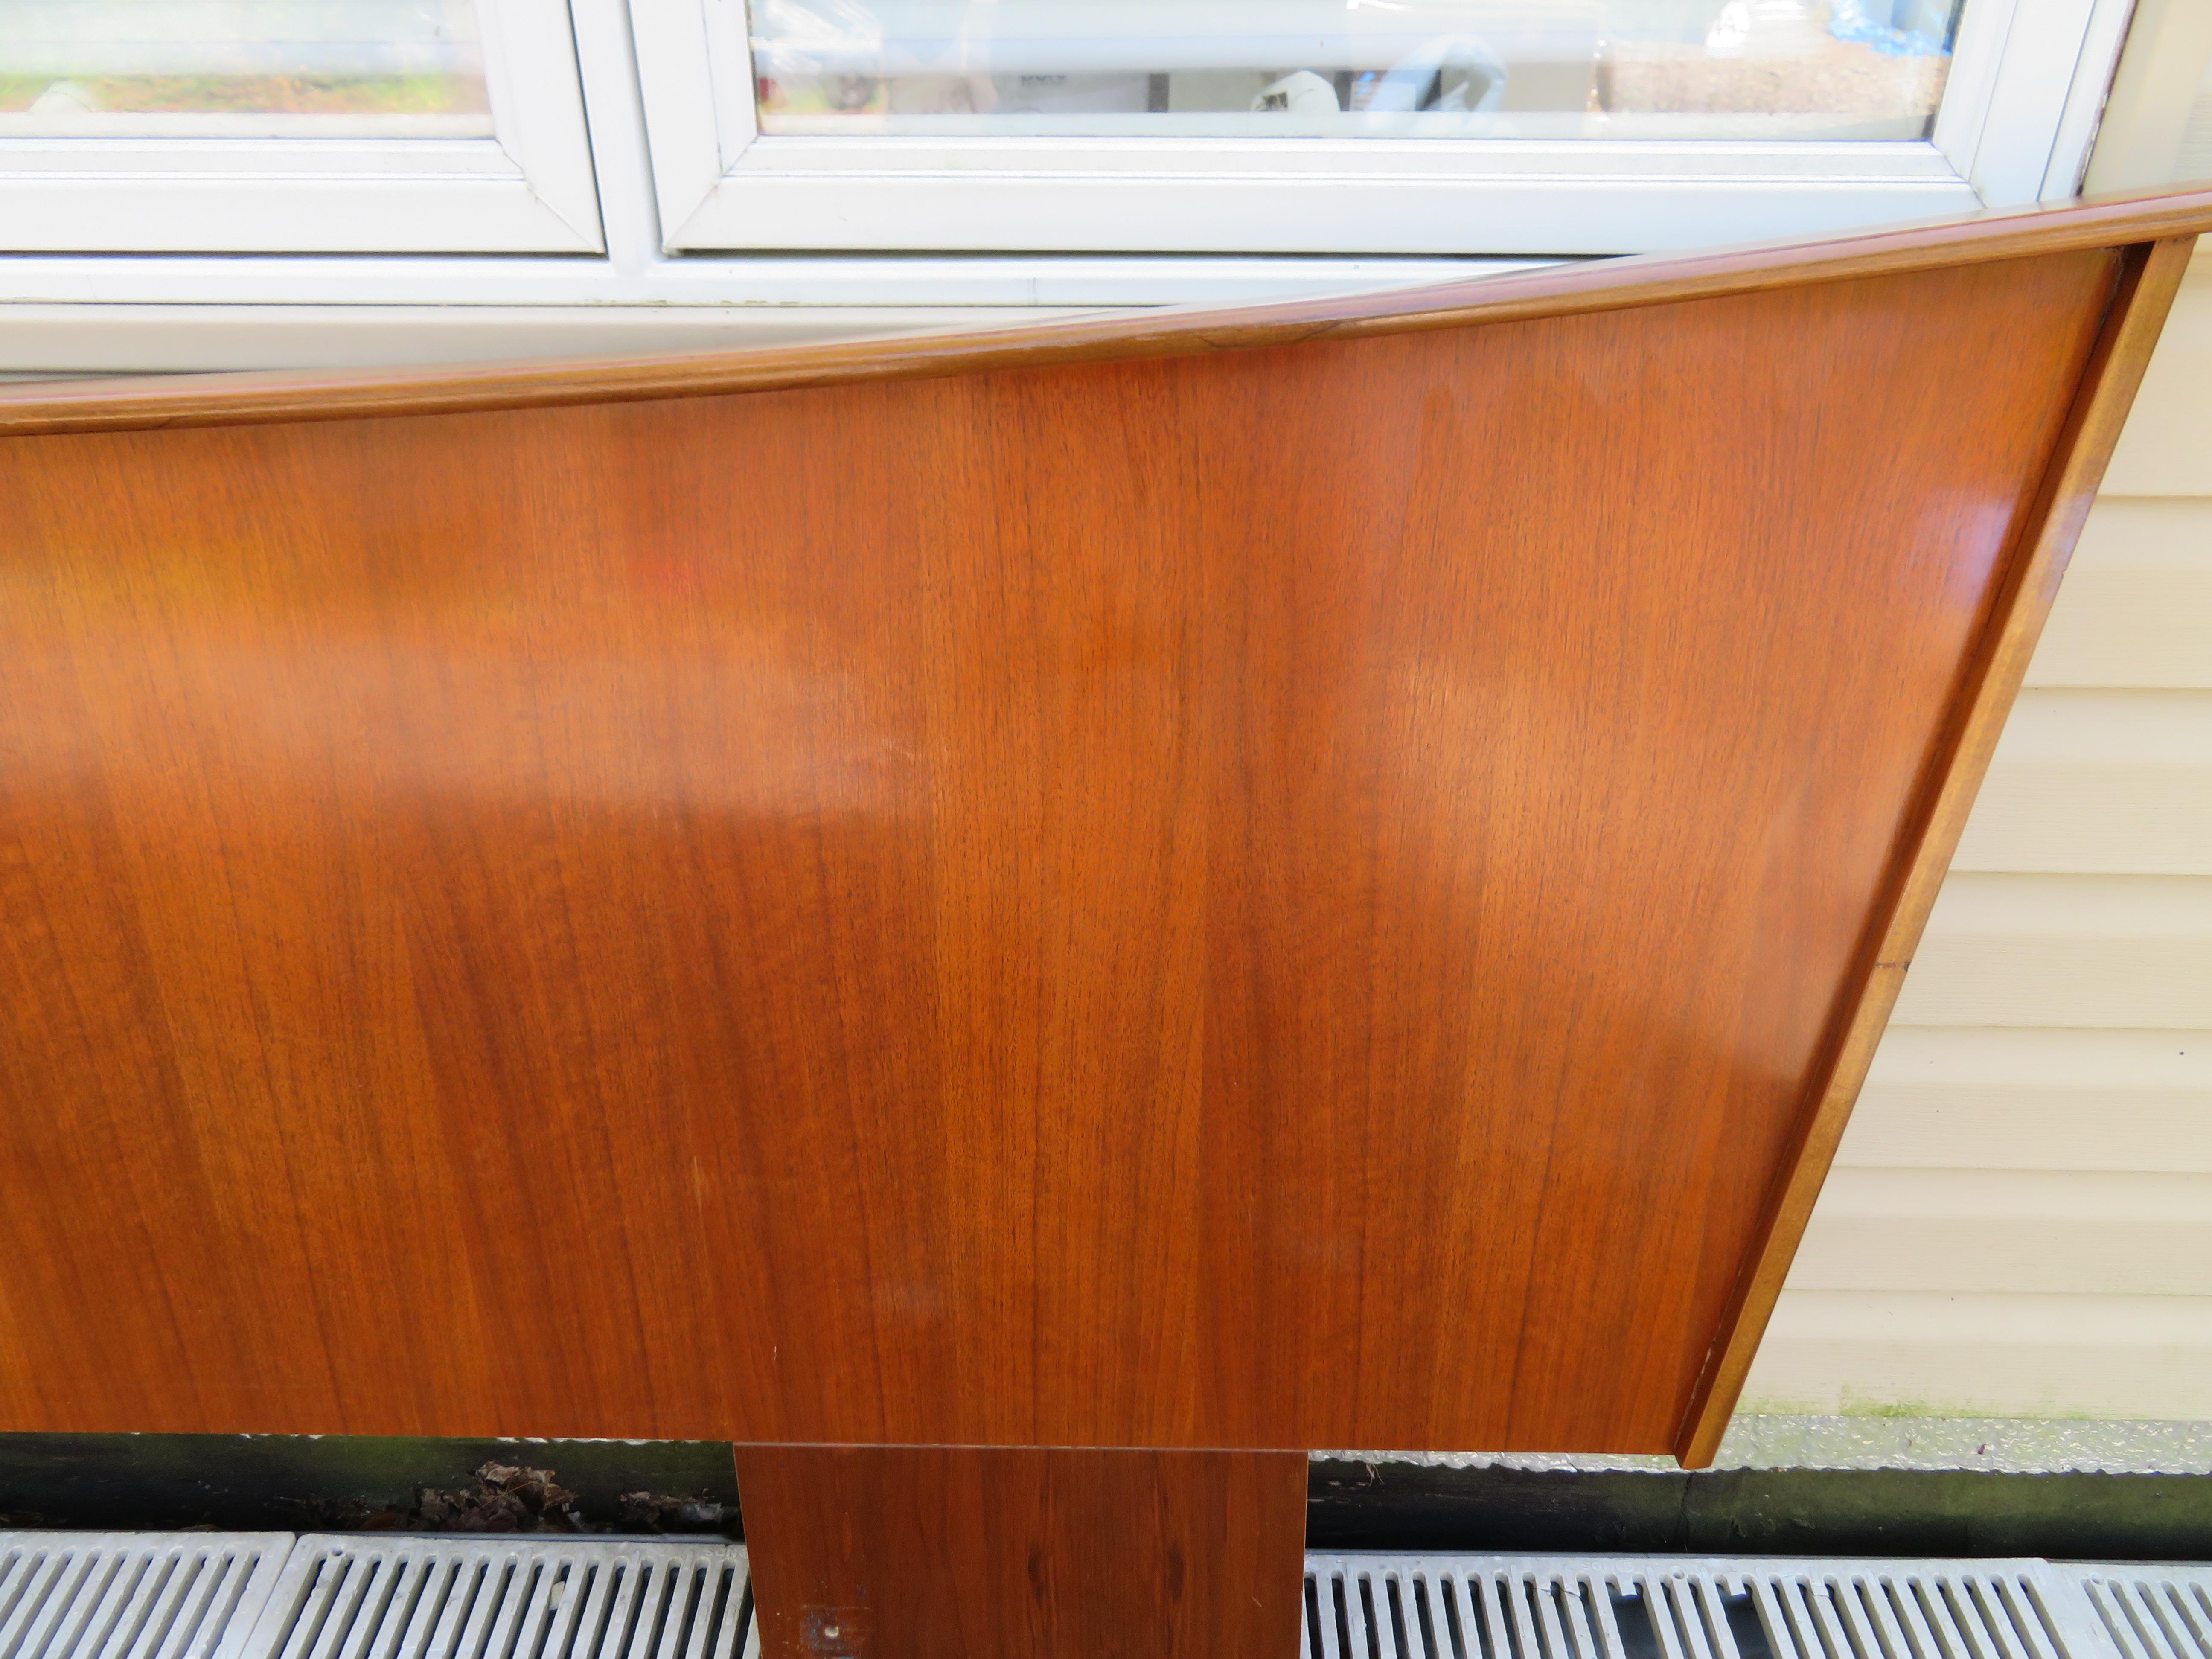 Magnificent Nakashima Style Walnut King-Size Headboard Mid-Century Modern In Good Condition For Sale In Pemberton, NJ